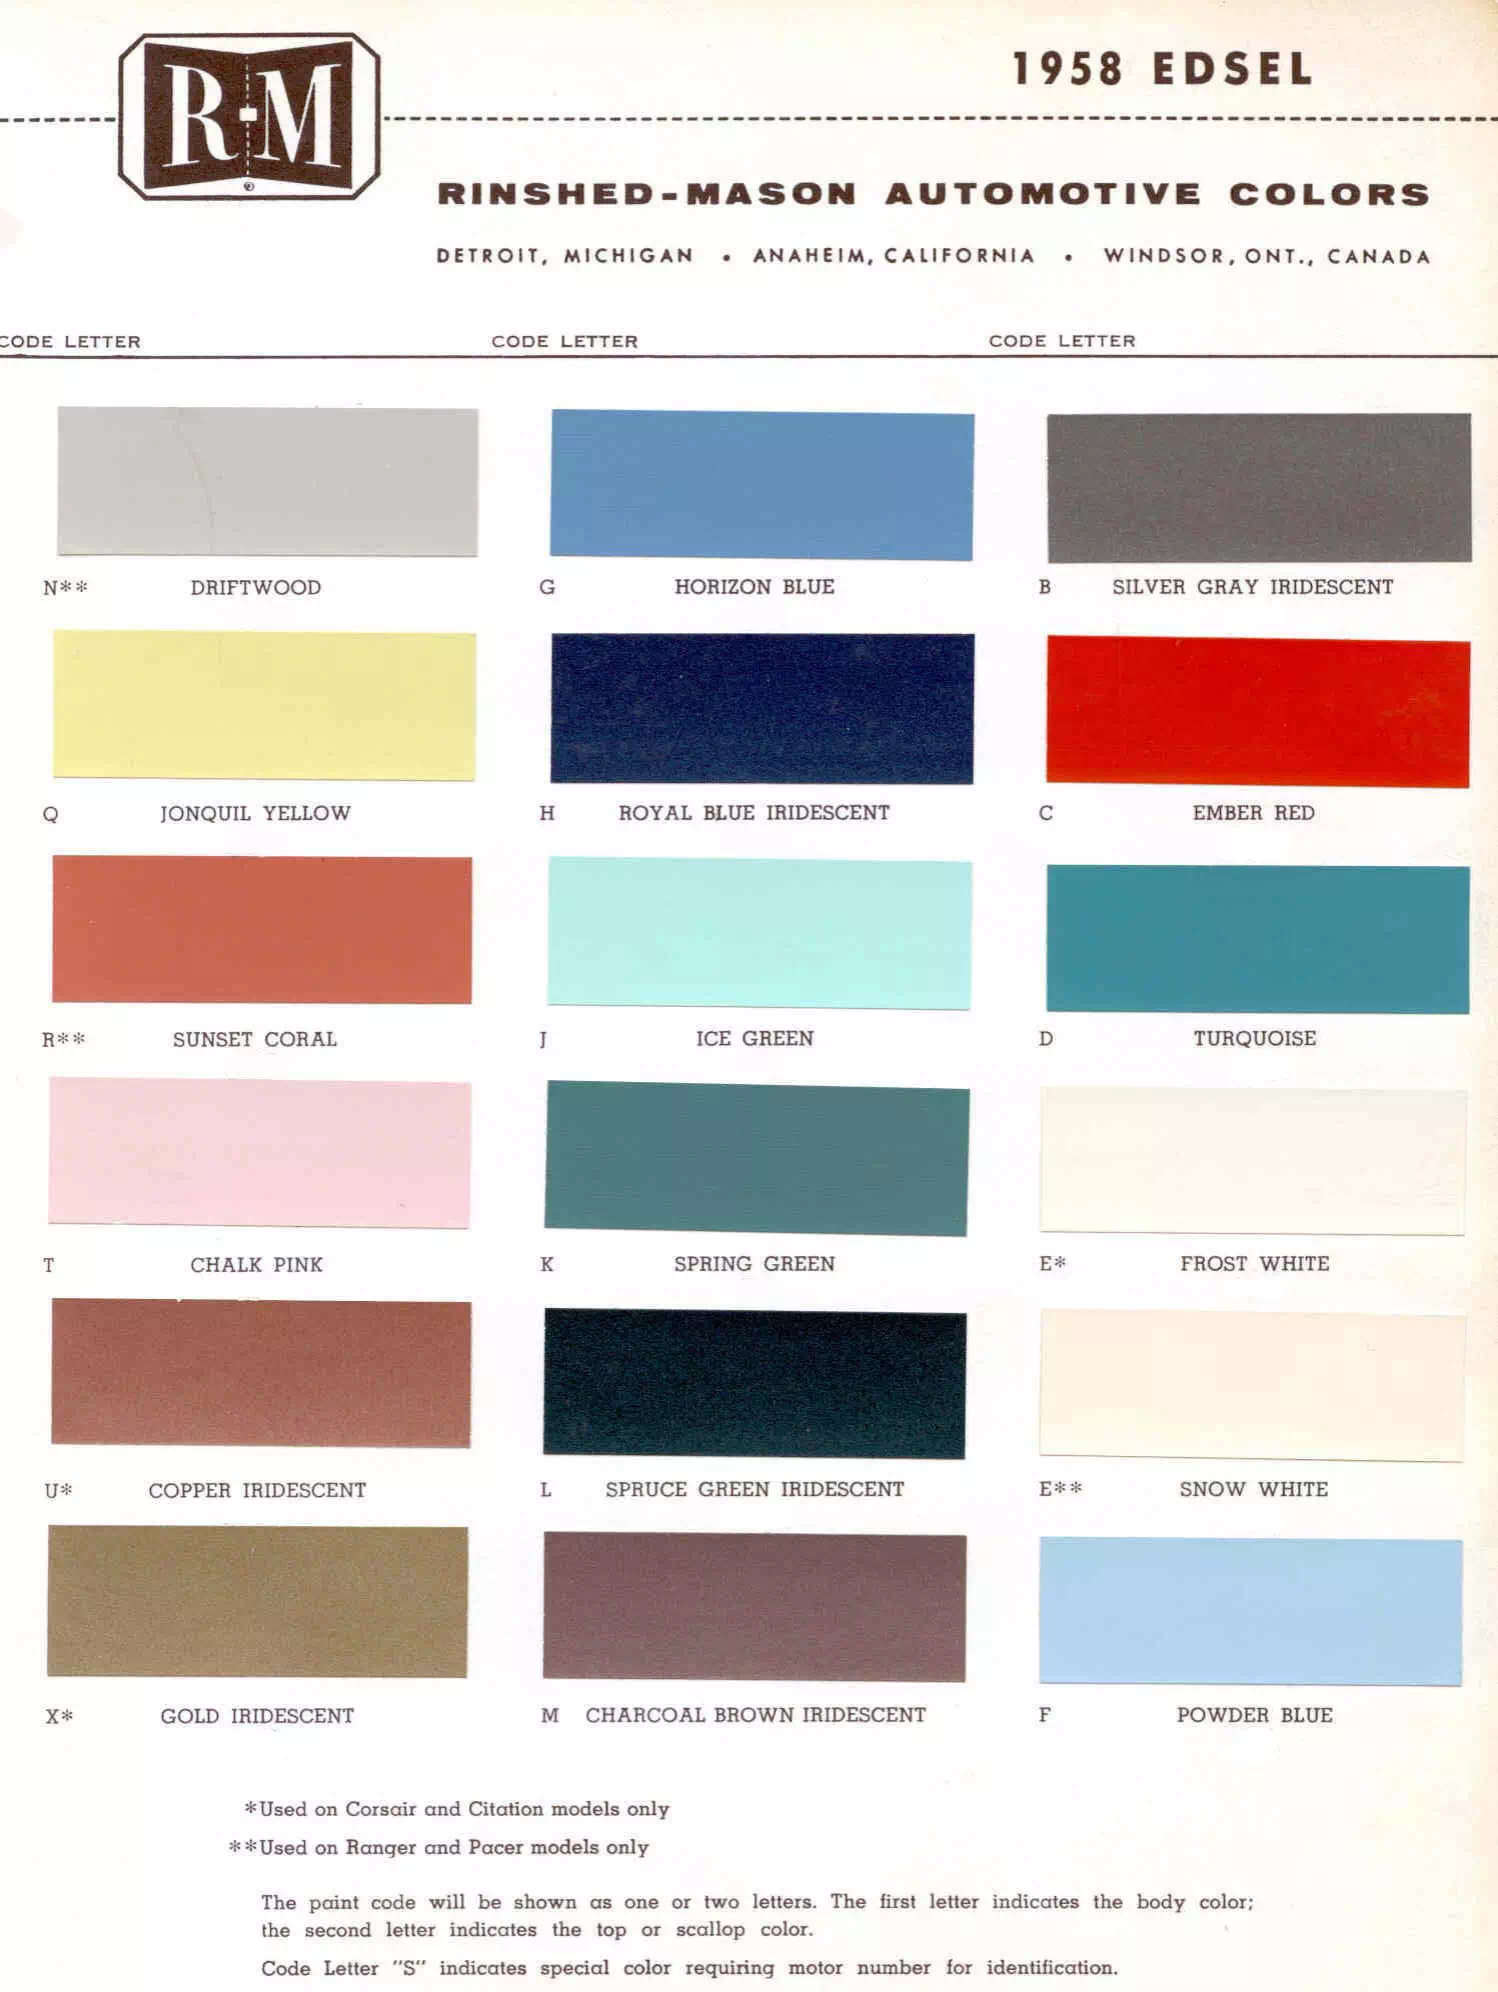 exterior colors, their codes, and example swatches used on the exterior of the vehicles in 1958